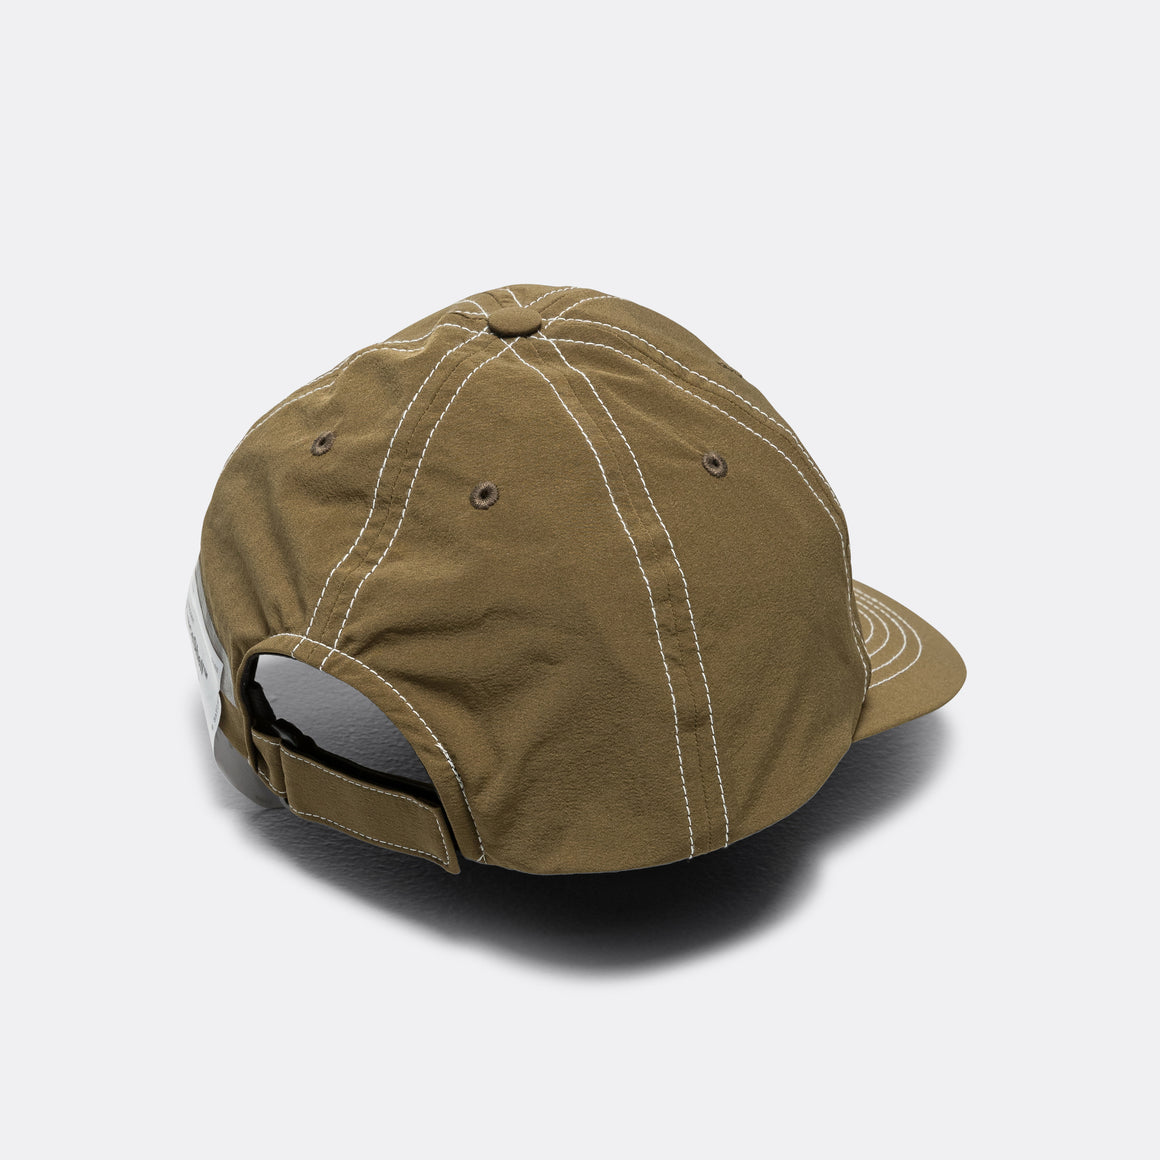 Satisfy - Peaceshell™ Running Cap - Military Olive - Up There Athletics